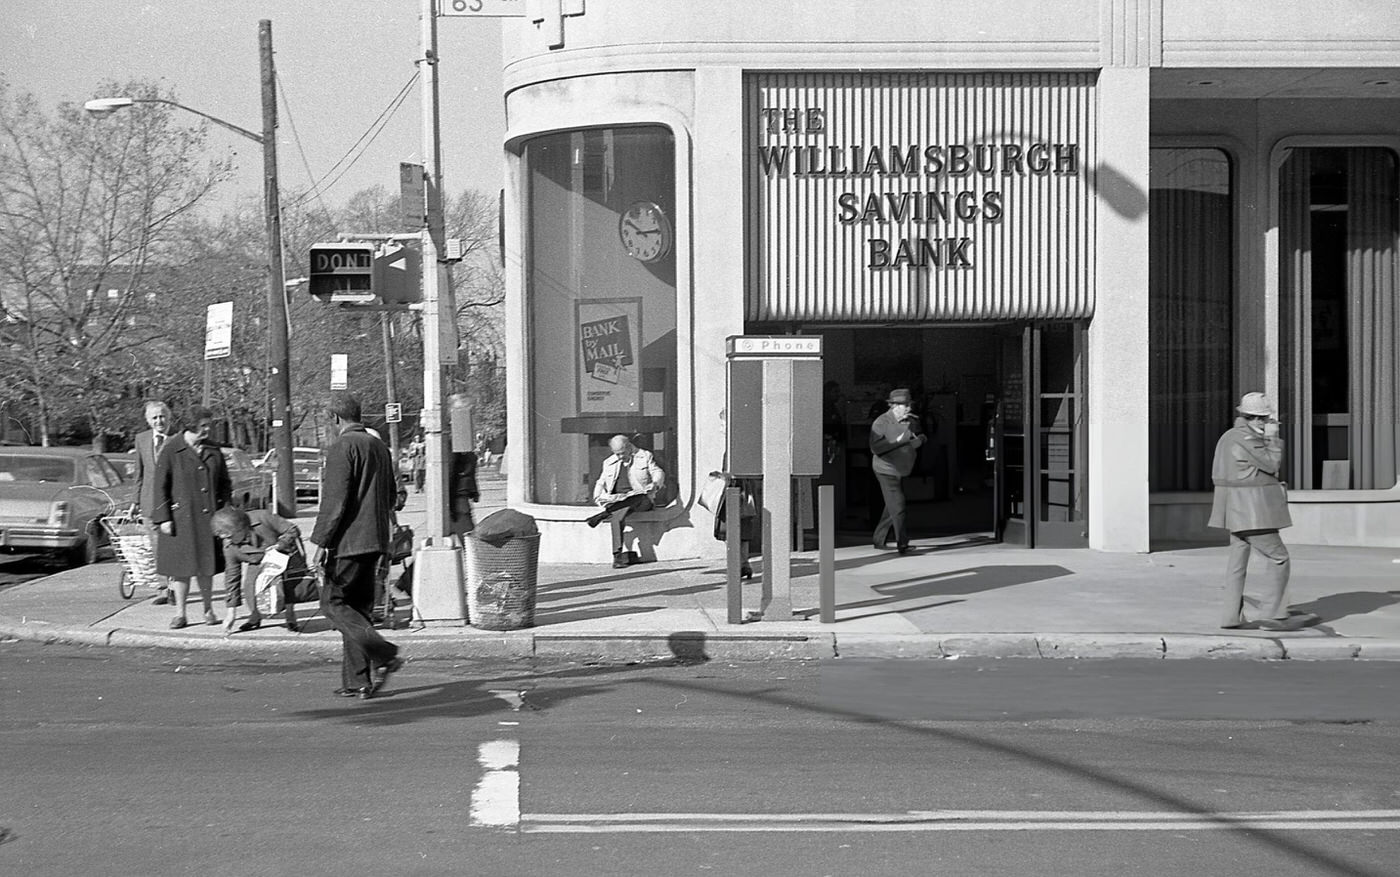 The Williamsburgh Savings Bank On 63Rd Drive In Rego Park, Queens, 1978.